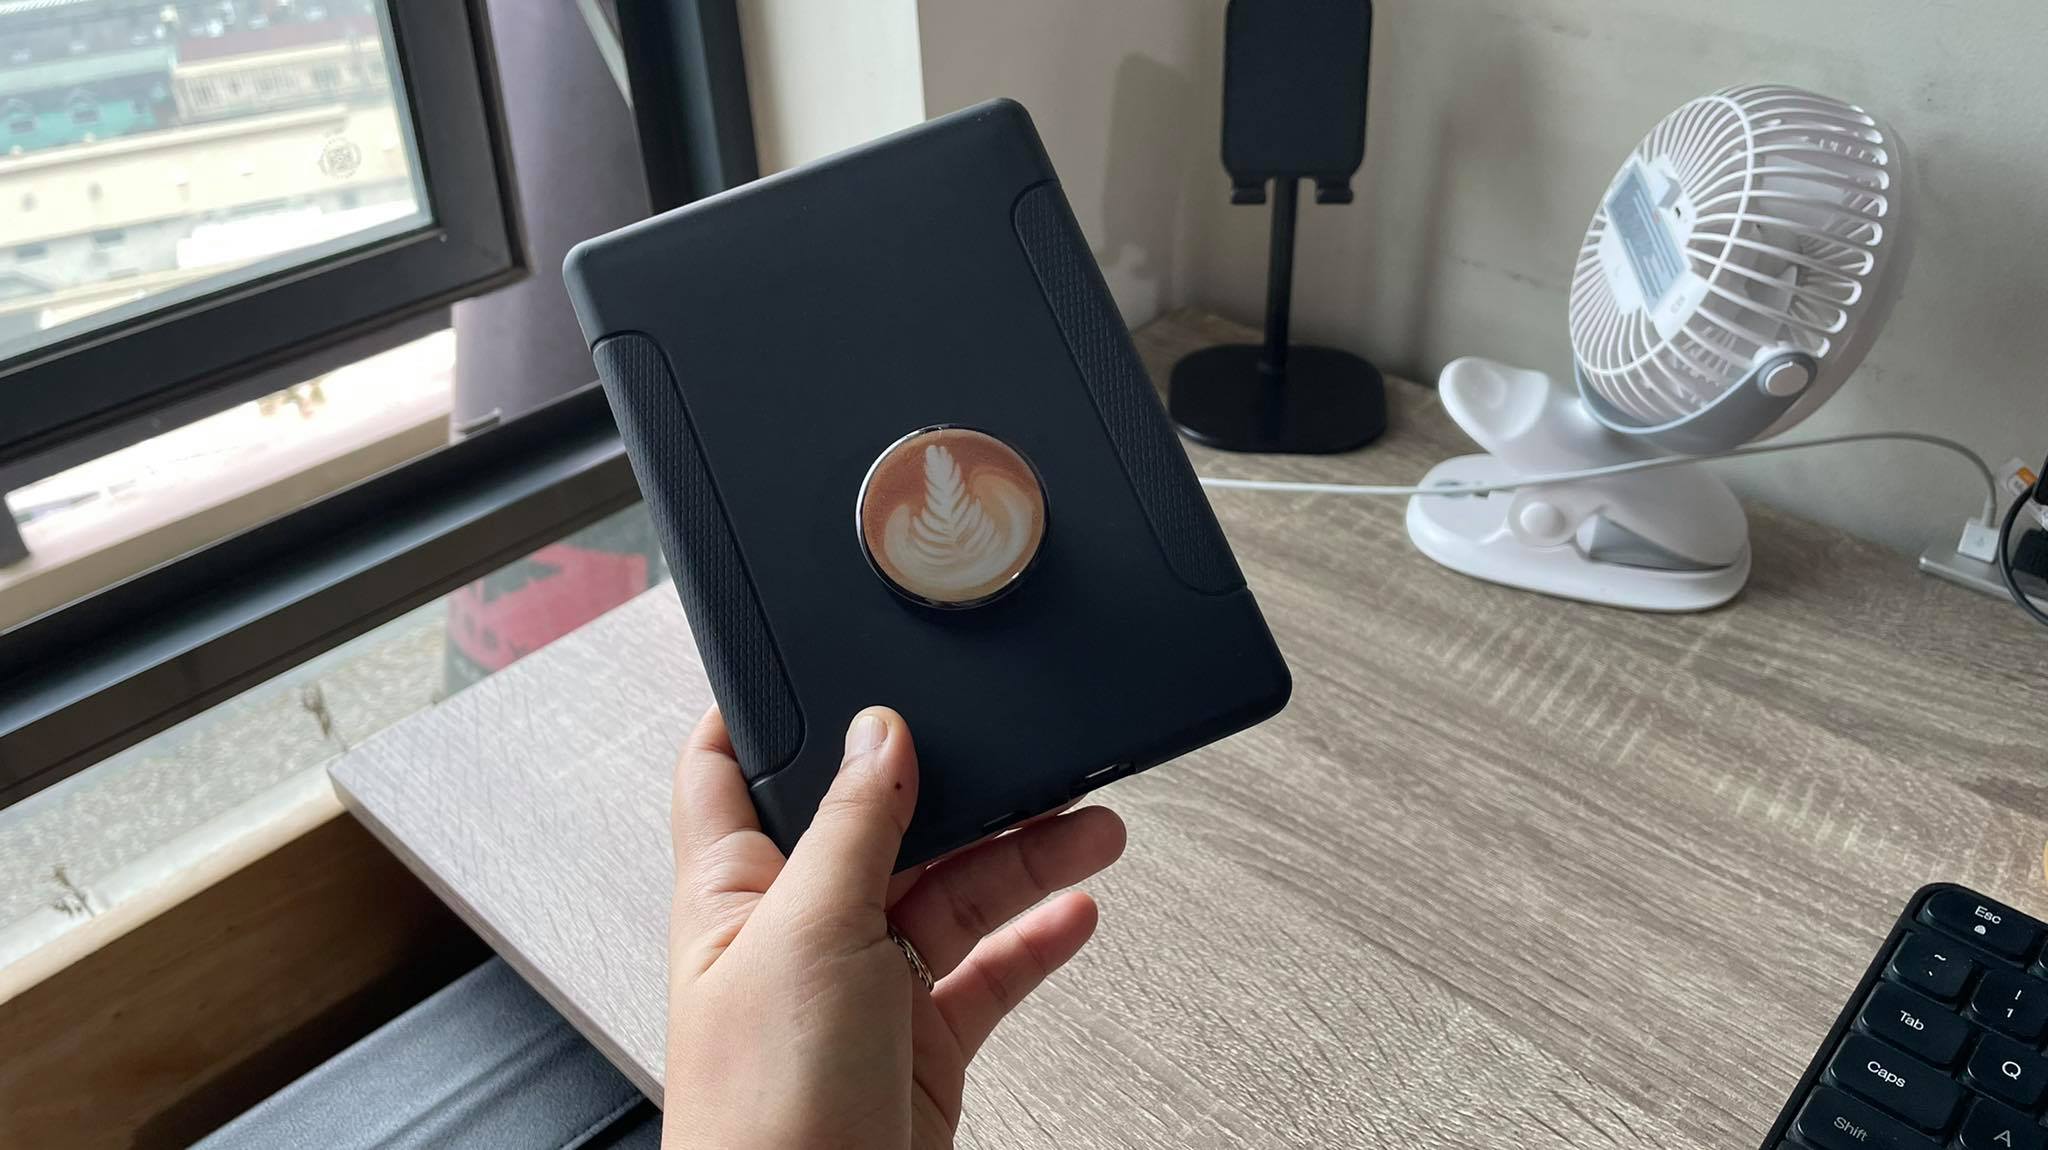 how-to-hold-a-popsocket-with-an-ipad